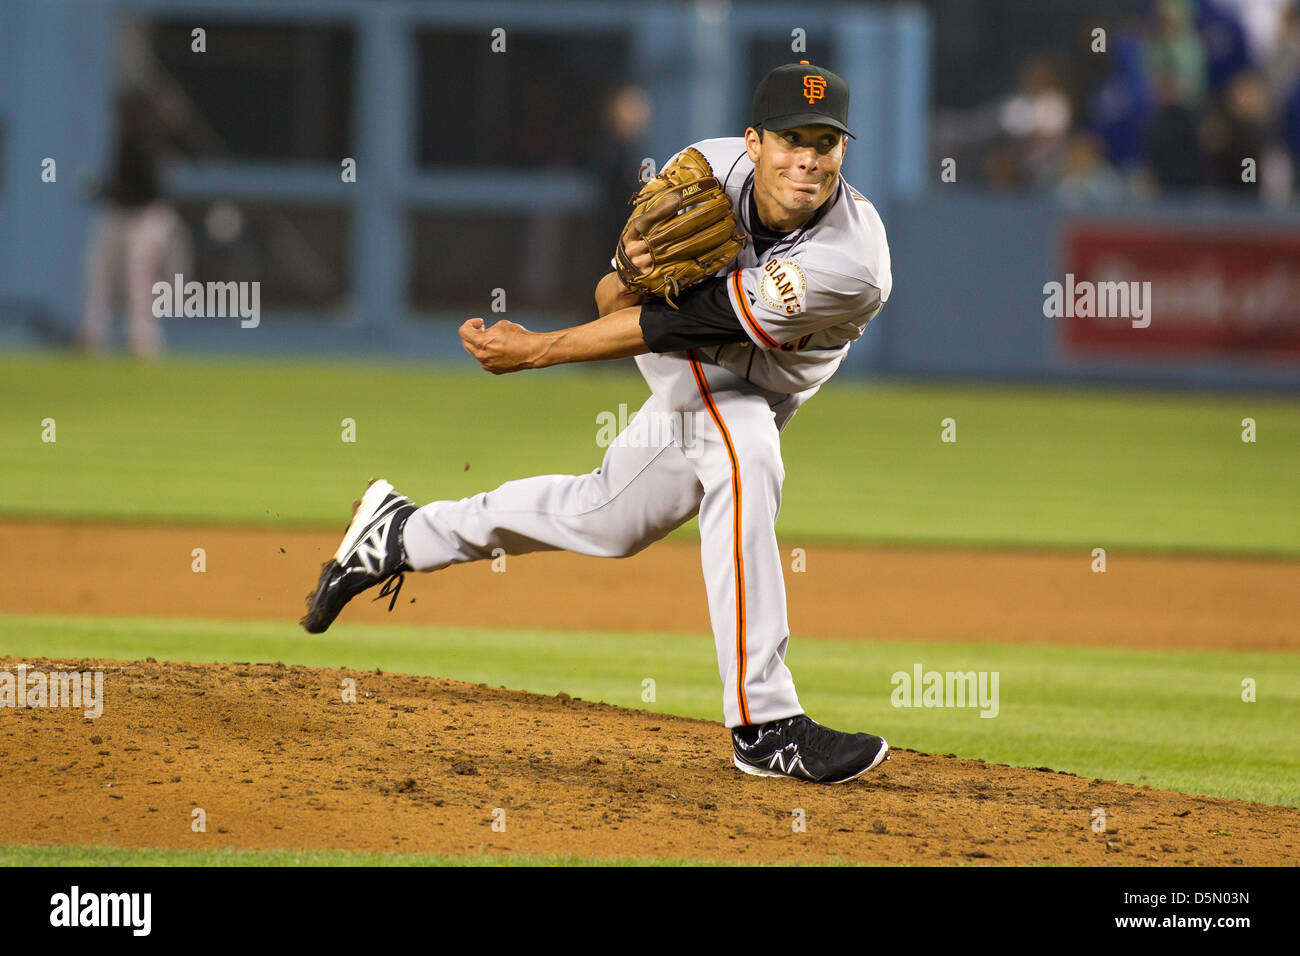 03.04.2013. Los Angeles, California, USA.  San Francisco Giants relief pitcher Javier Lopez (49) delivers during the Major League Baseball game between the Los Angeles Dodgers and the San Francisco Giants at Dodger Stadium in Los Angels, CA. The Giants defeated the Dodgers 5-3. Stock Photo